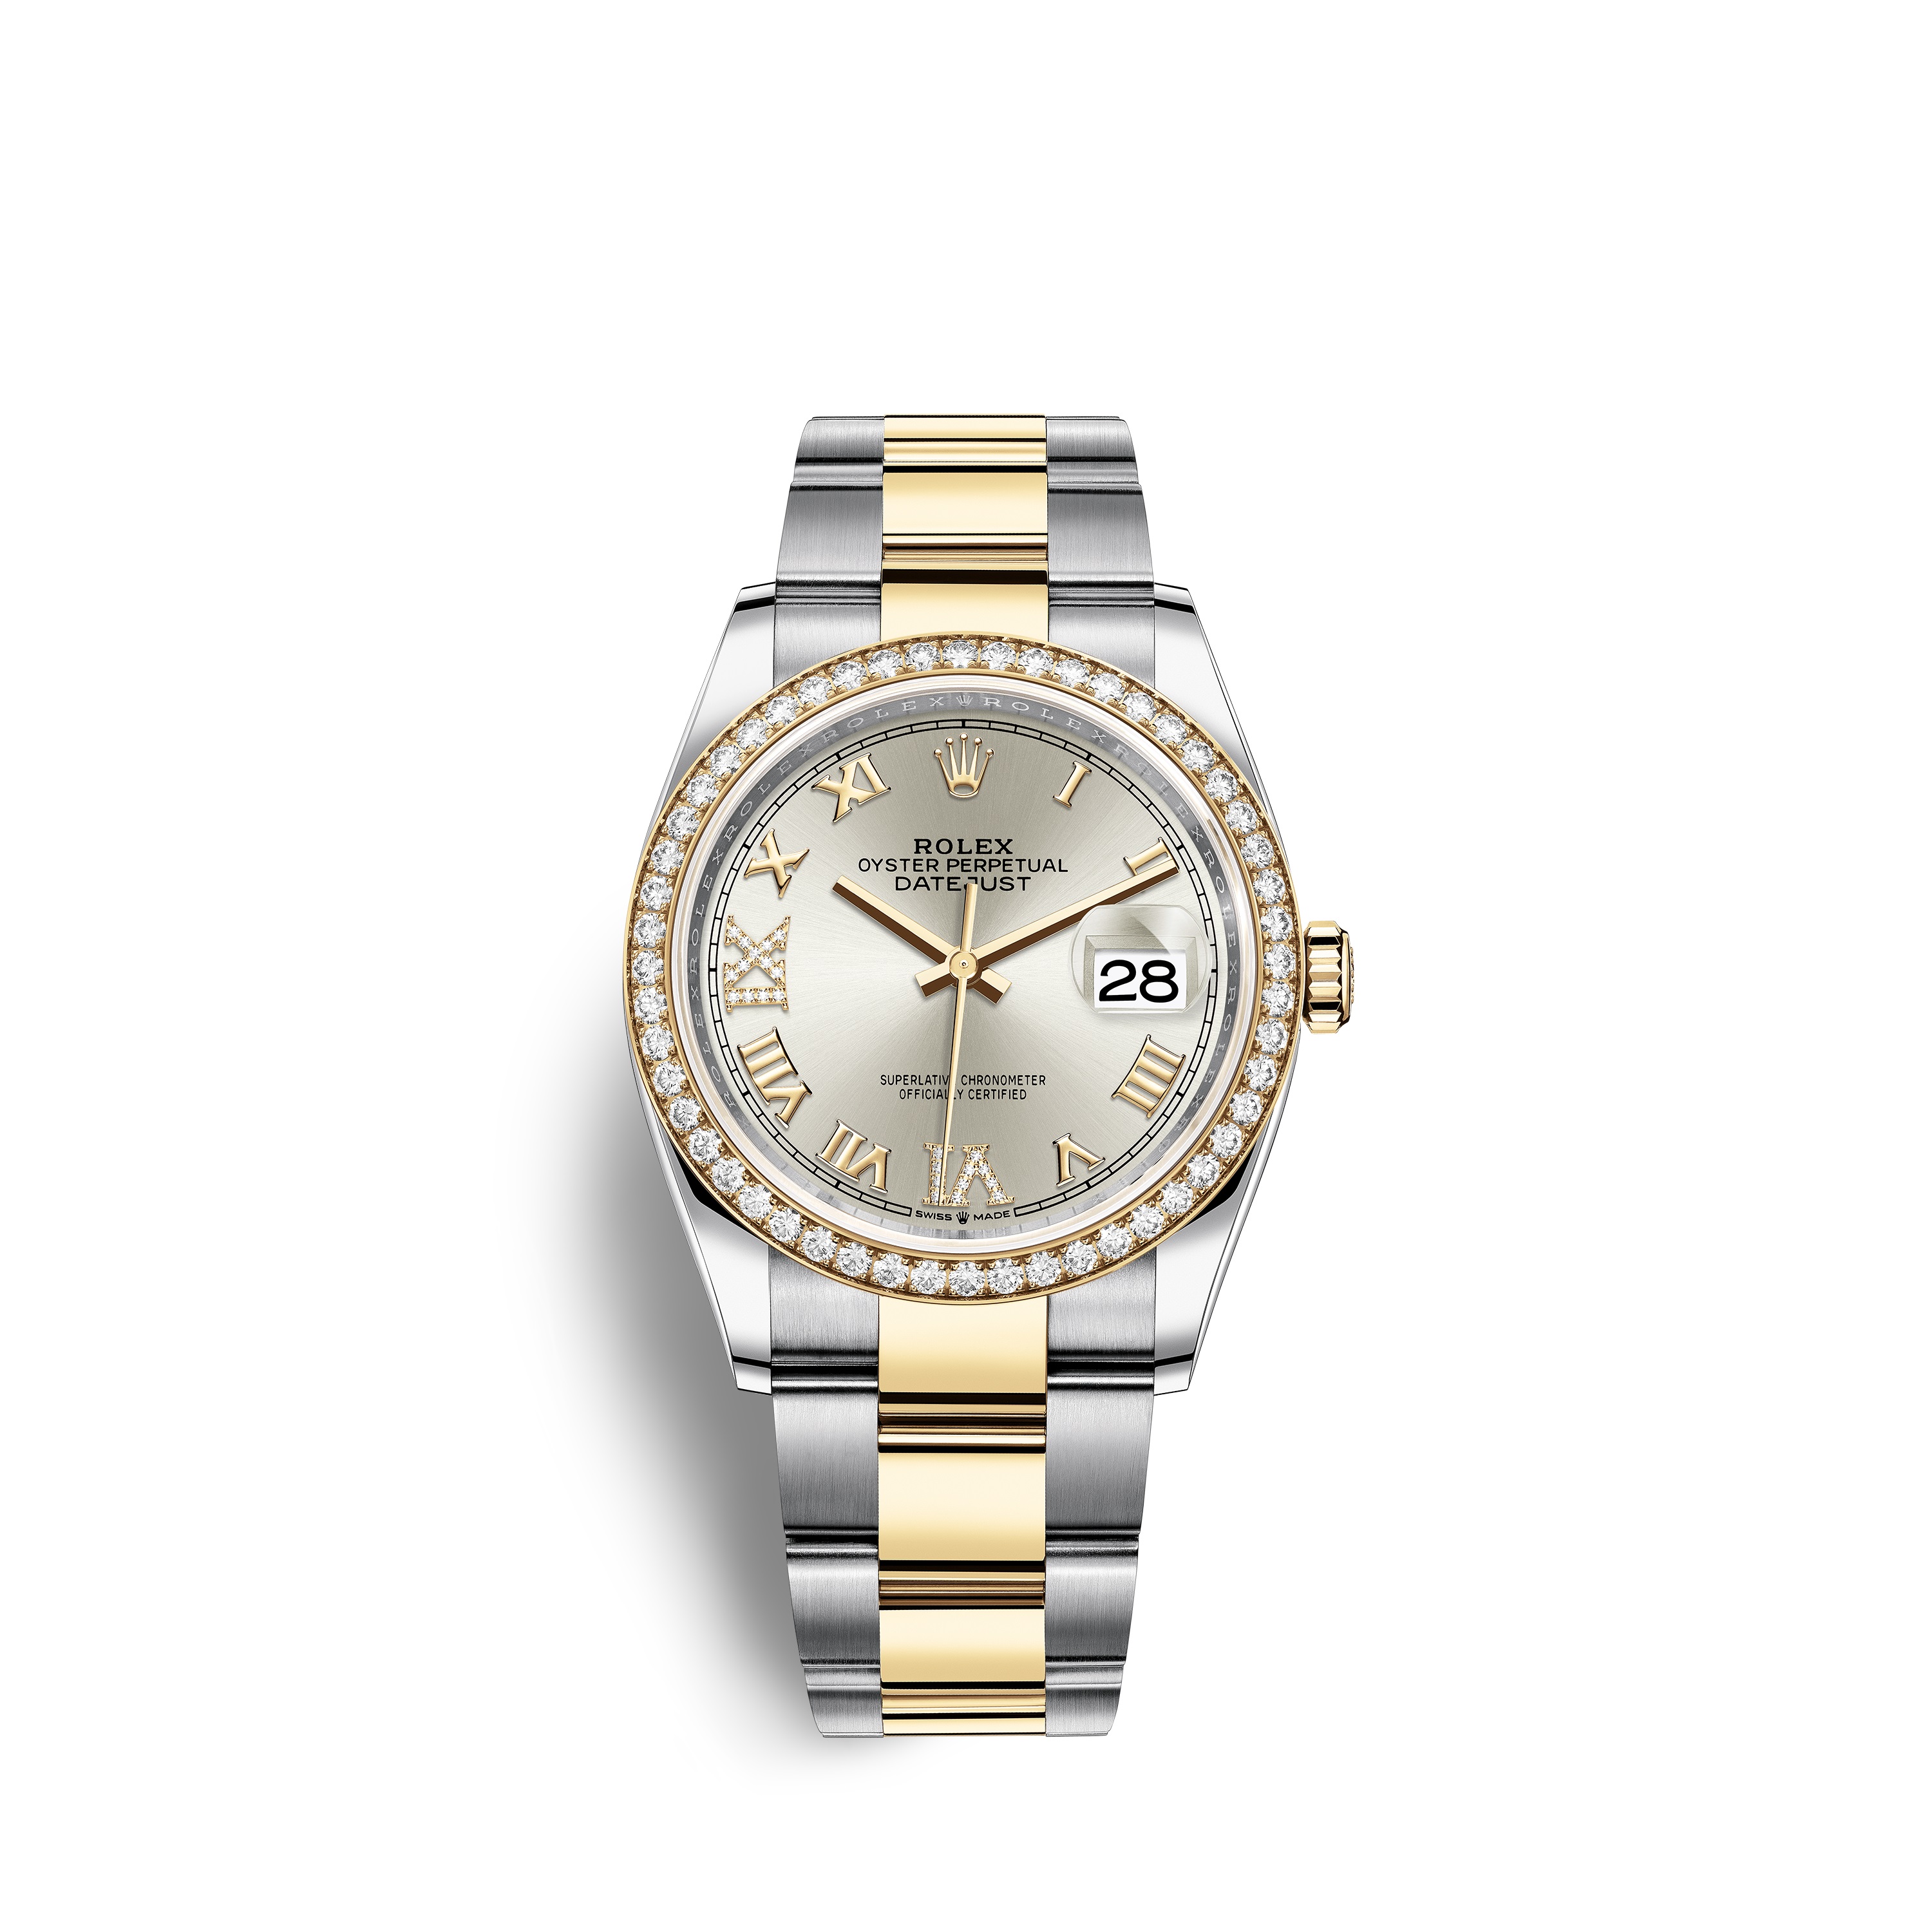 Datejust 36 126283RBR Gold & Stainless Steel Watch (Silver Set with Diamonds)